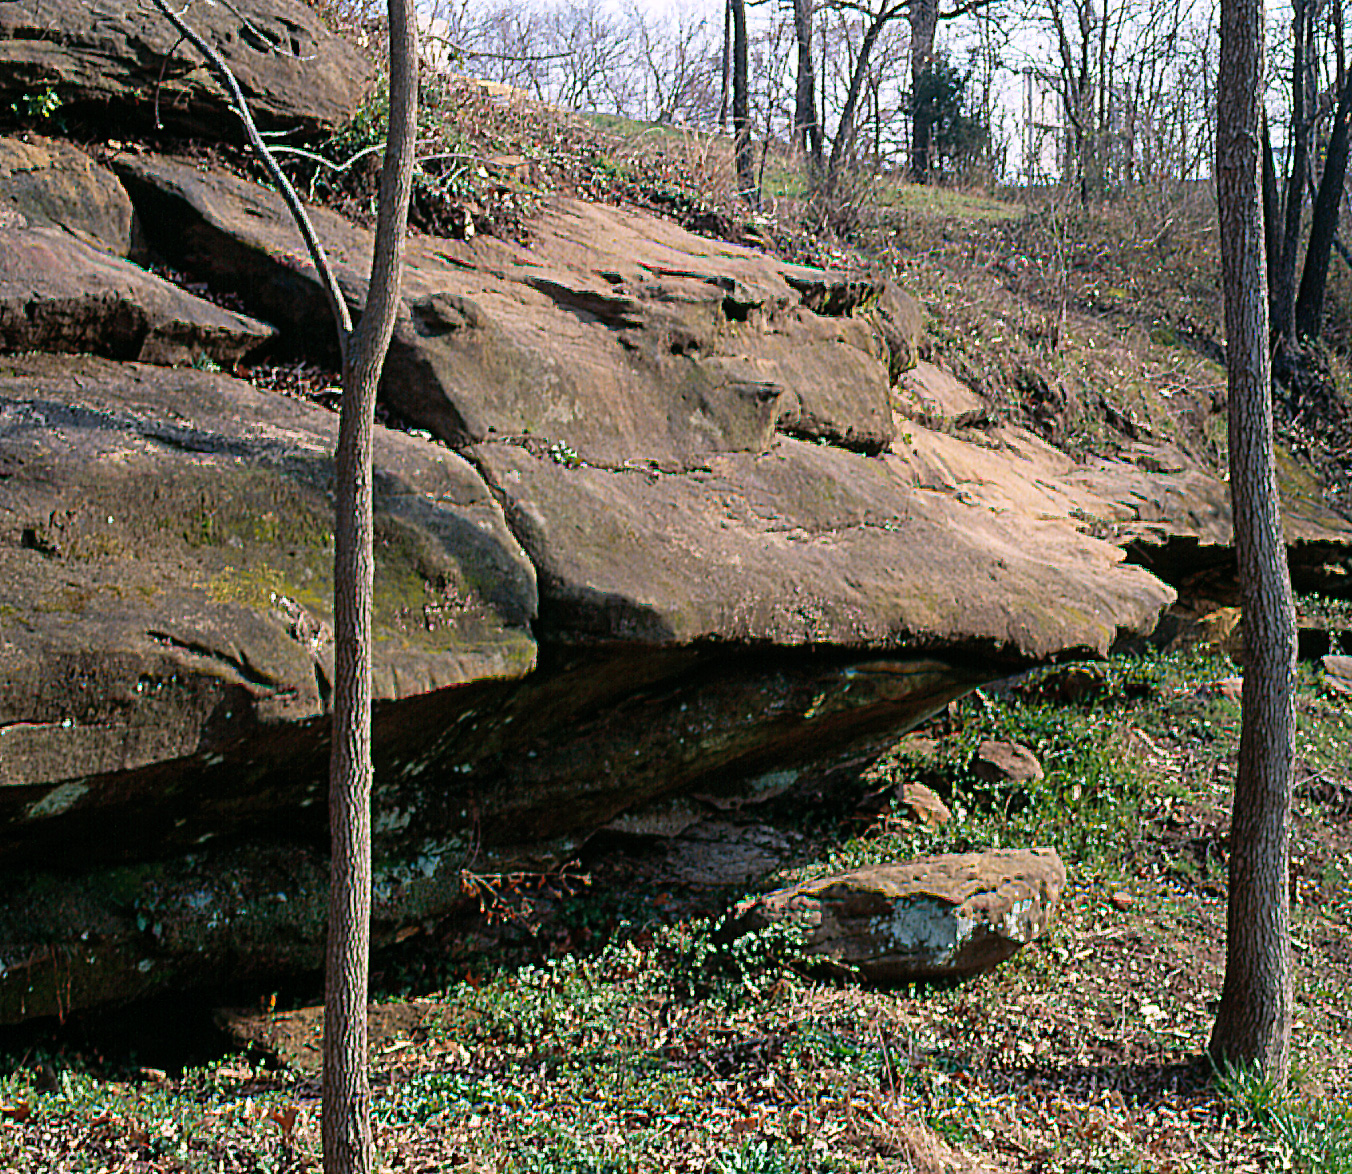 Outcrop of typical Chautauqua Hills sandstone at The Hollow, a city park in Sedan, Kansas.